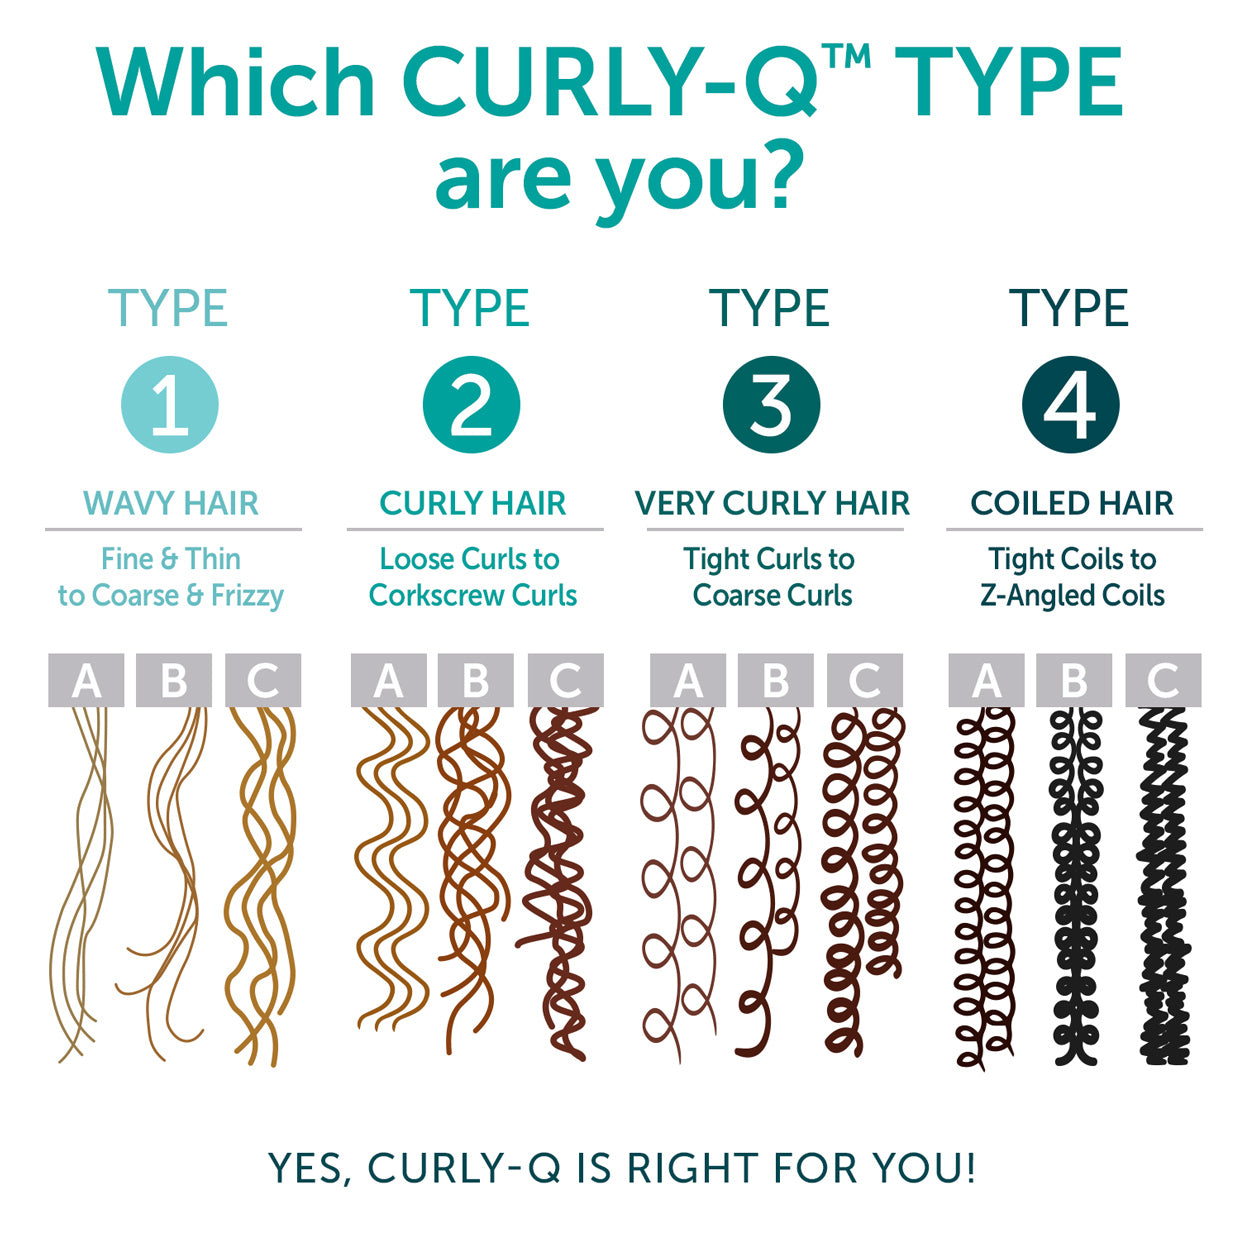 The Ultimate Curly-Q™ Kit